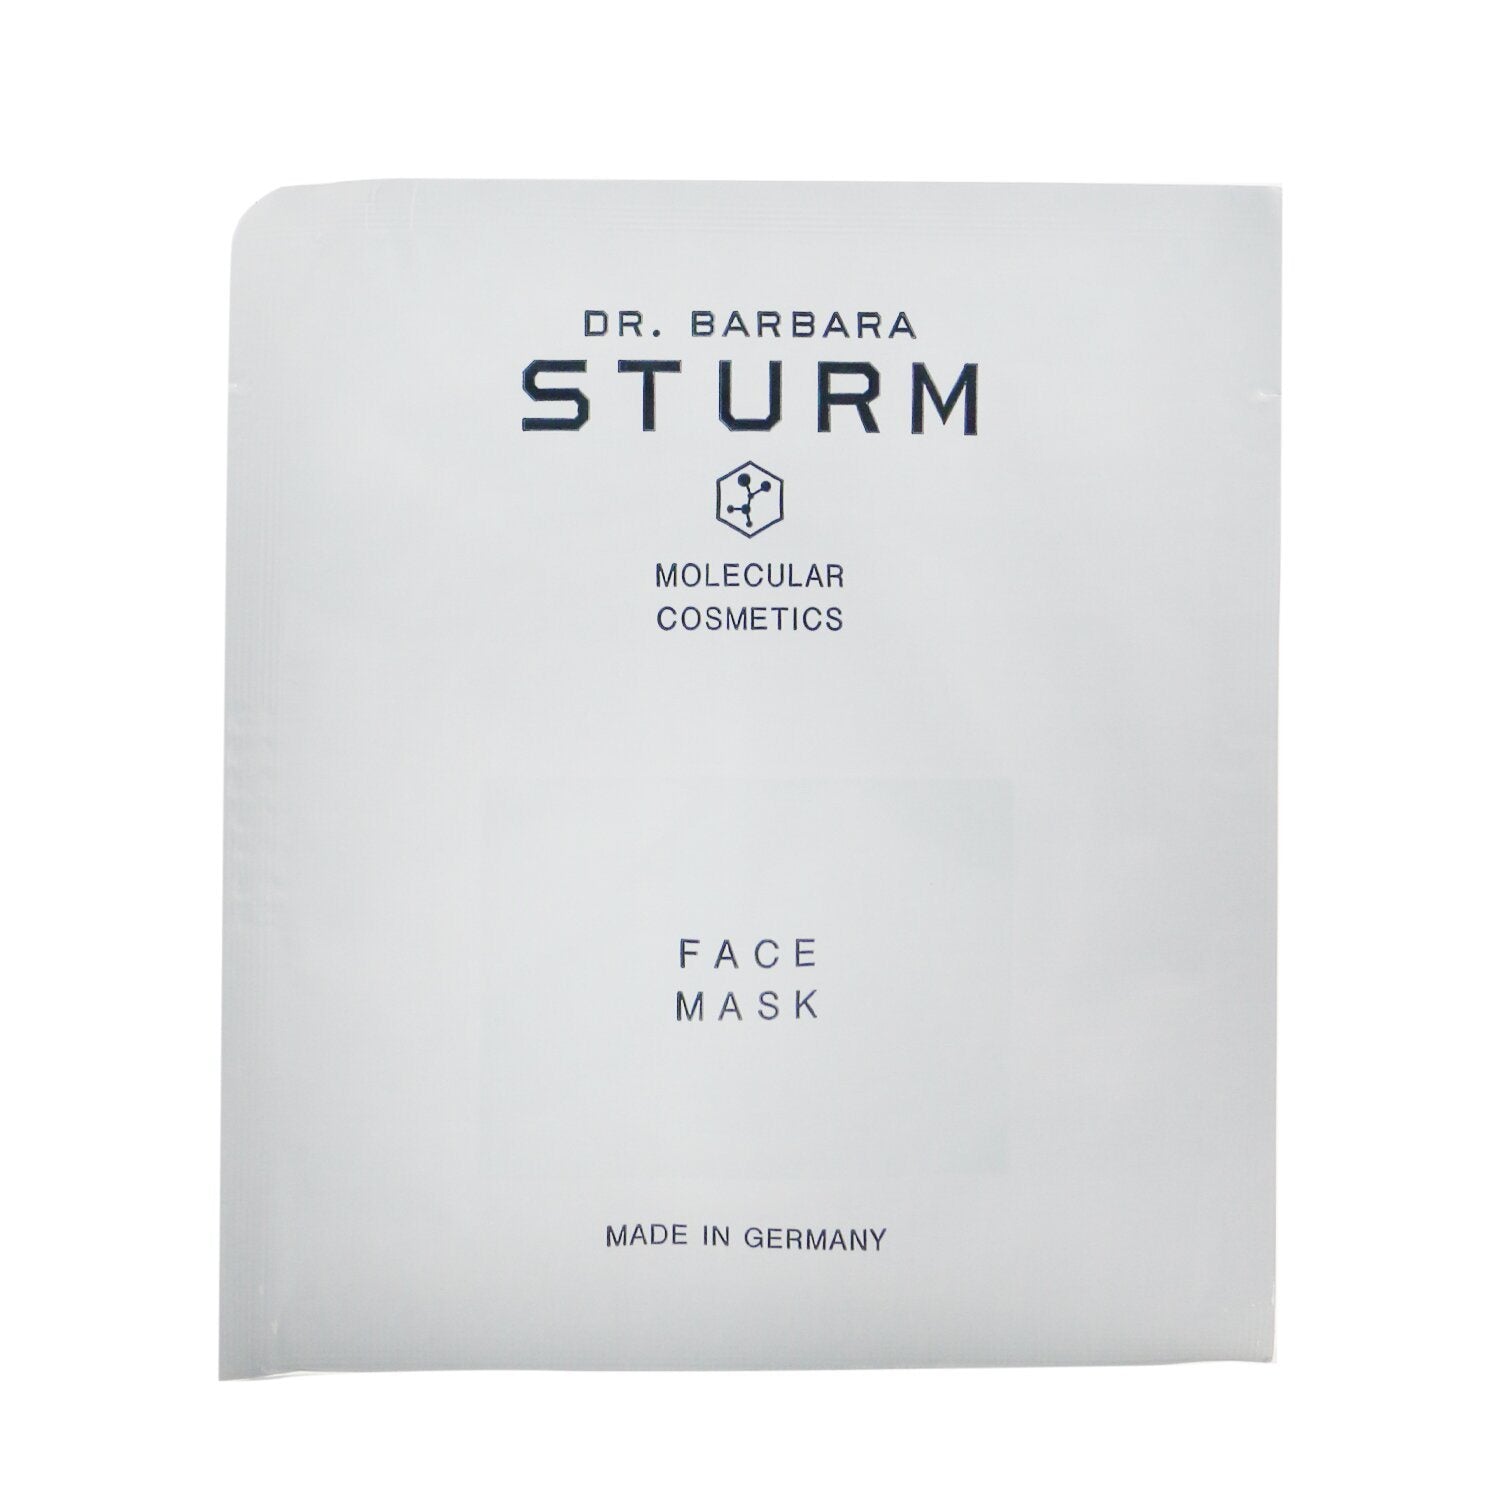 A package of DR. BARBARA STURM - Face Mask Sachet Box 33529/455006 7x10ml/0.33oz labeled "molecular cosmetics" on a white background.